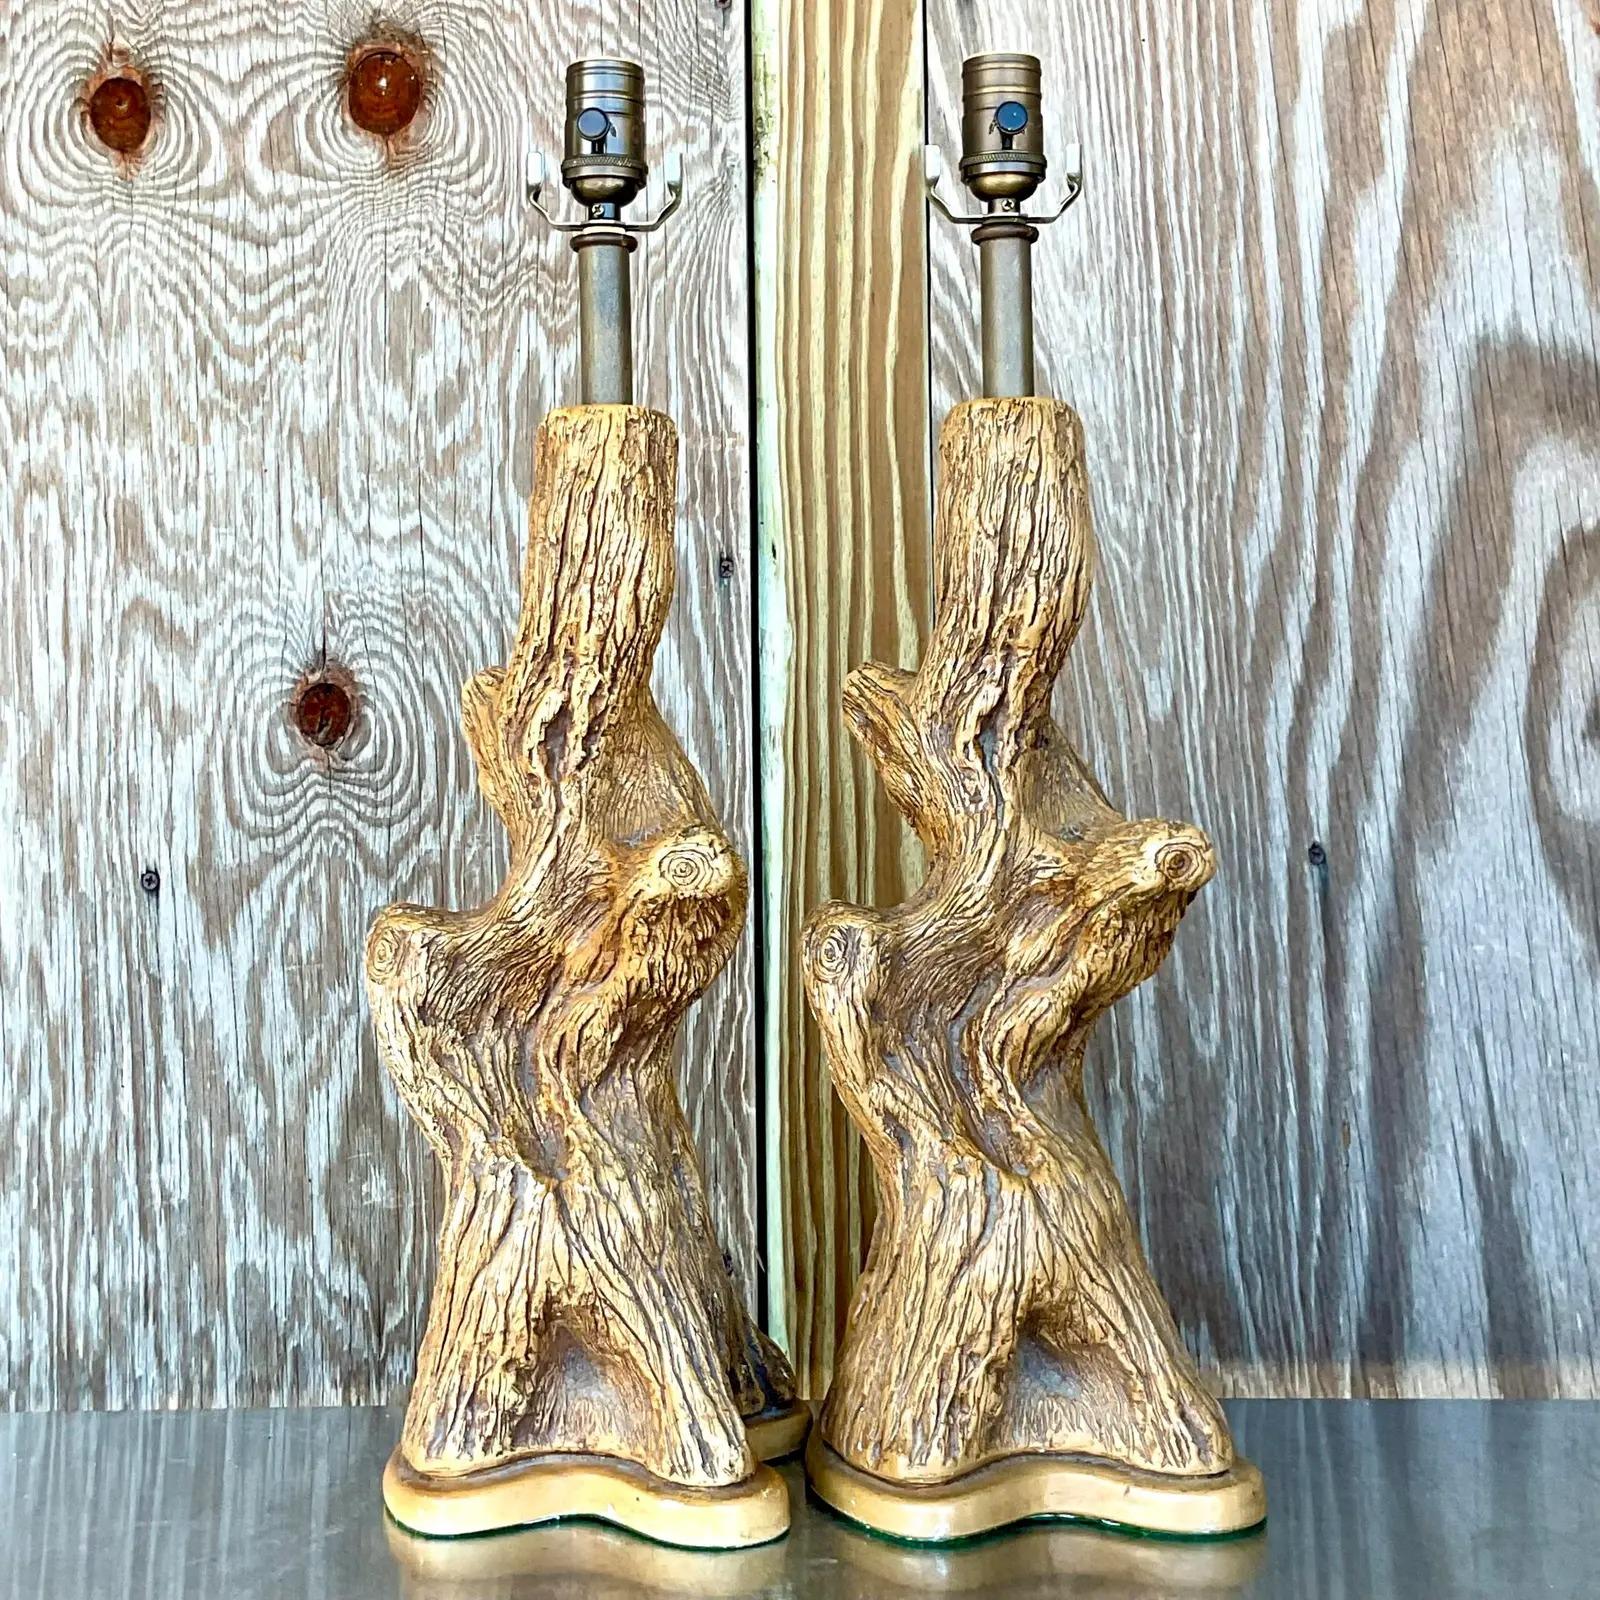 Incredible vintage pair of Boho table lamps. Fantastic tree trunks in a painted plaster body. Fully restored with all new hardware and wiring. Acquired from a Palm Beach estate.